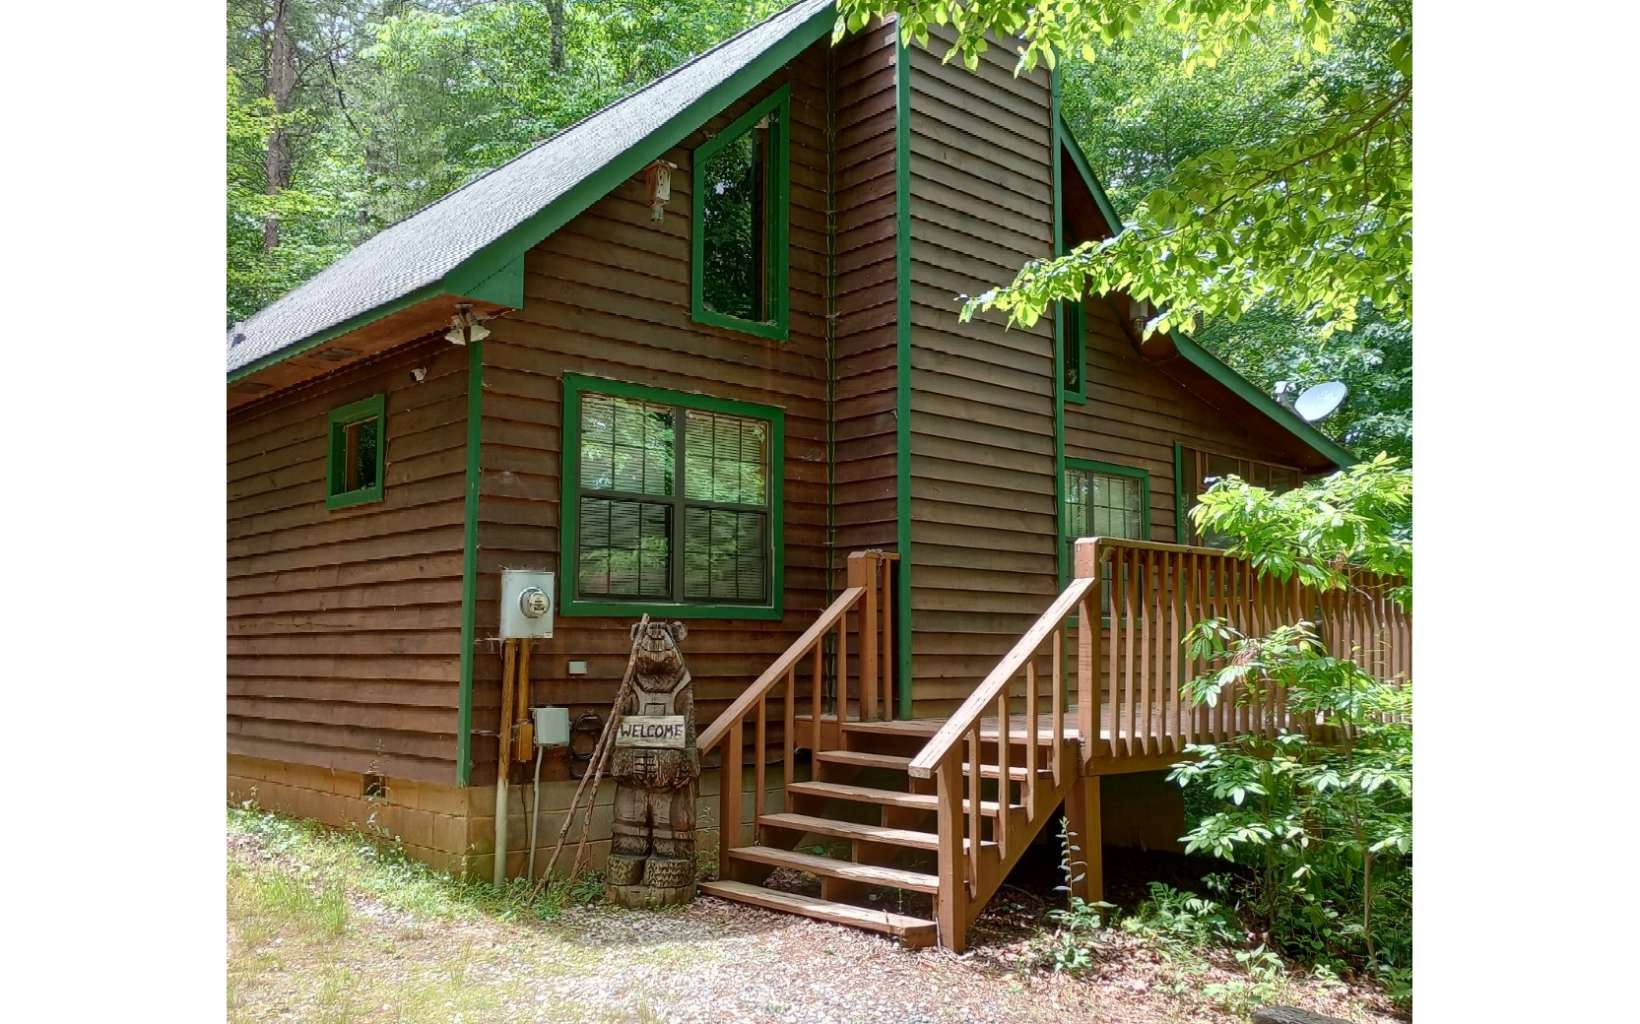 PRICE REDUCED! VACATION RENTAL ON VRBO! This 2BR/1BA mountain cabin features a woodburning fireplace, screened porch, bbq deck and hot tub. The perfect getaway for couples or a small family, located near the So. end of the Appalachian Trail, the Toccoa River and the Benton Mackaye. Trail. It has a cathedral ceiling, a warm, wood interior, a large sleeping loft and a fire ring/picnic area to enjoy on those peaceful mountain evenings. This cabin has easy access and is generating income on a rental program with a successful history which can continue and improve if the new owners desire. There can be a mountain view with a little pruning. Price just dropped! See to appreciate!!